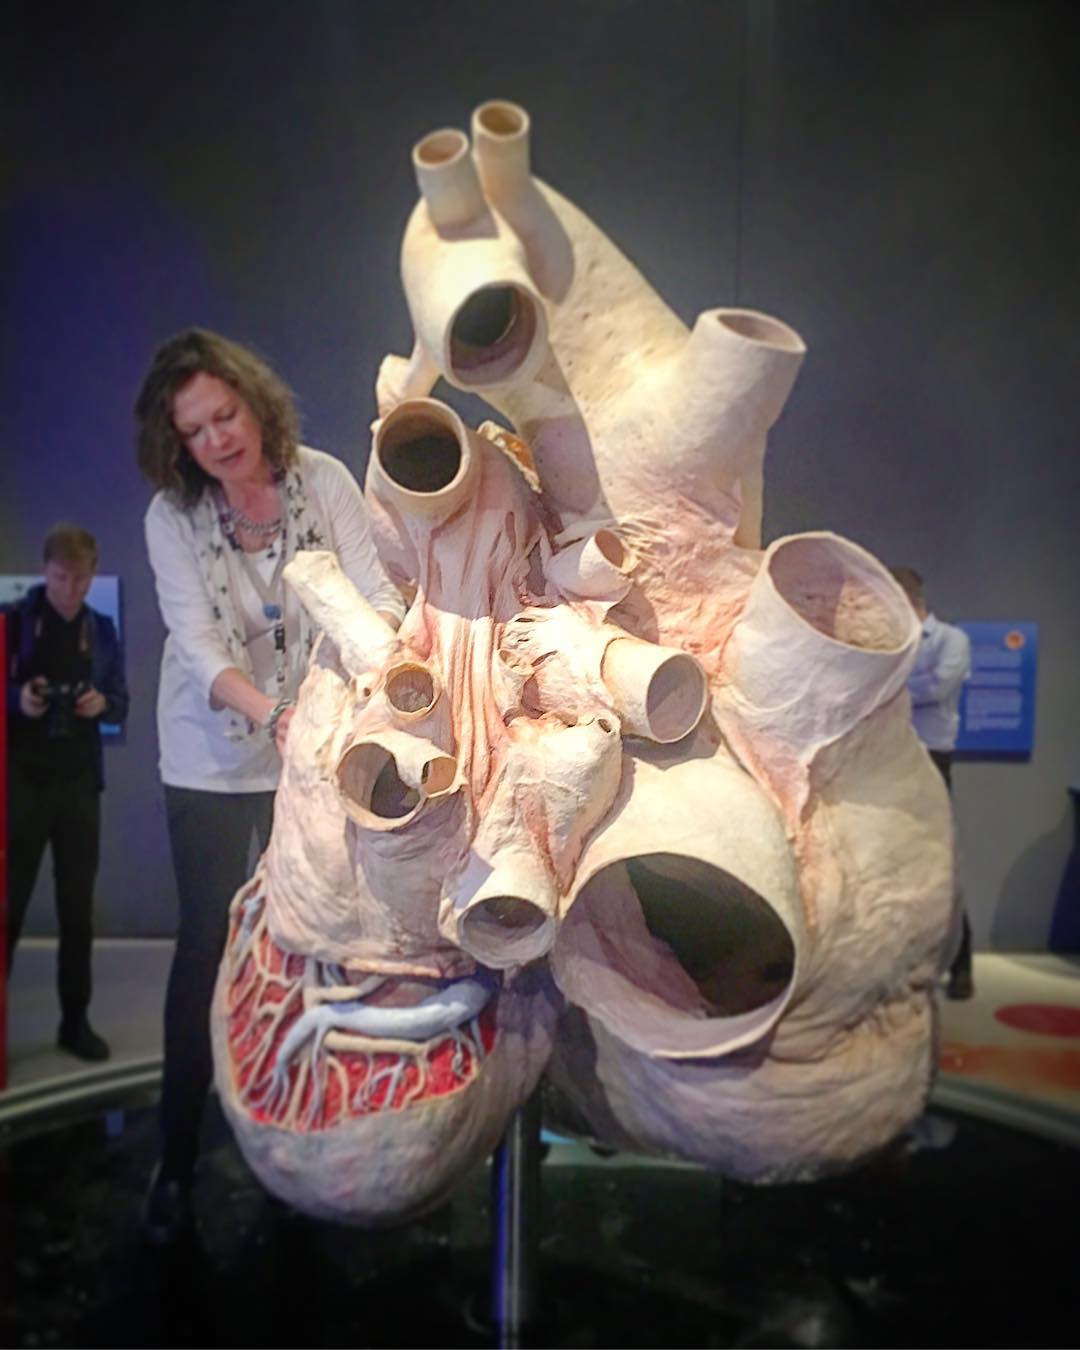 A blue whale heart weighs around 400 lb and can be up to 5 feet long.